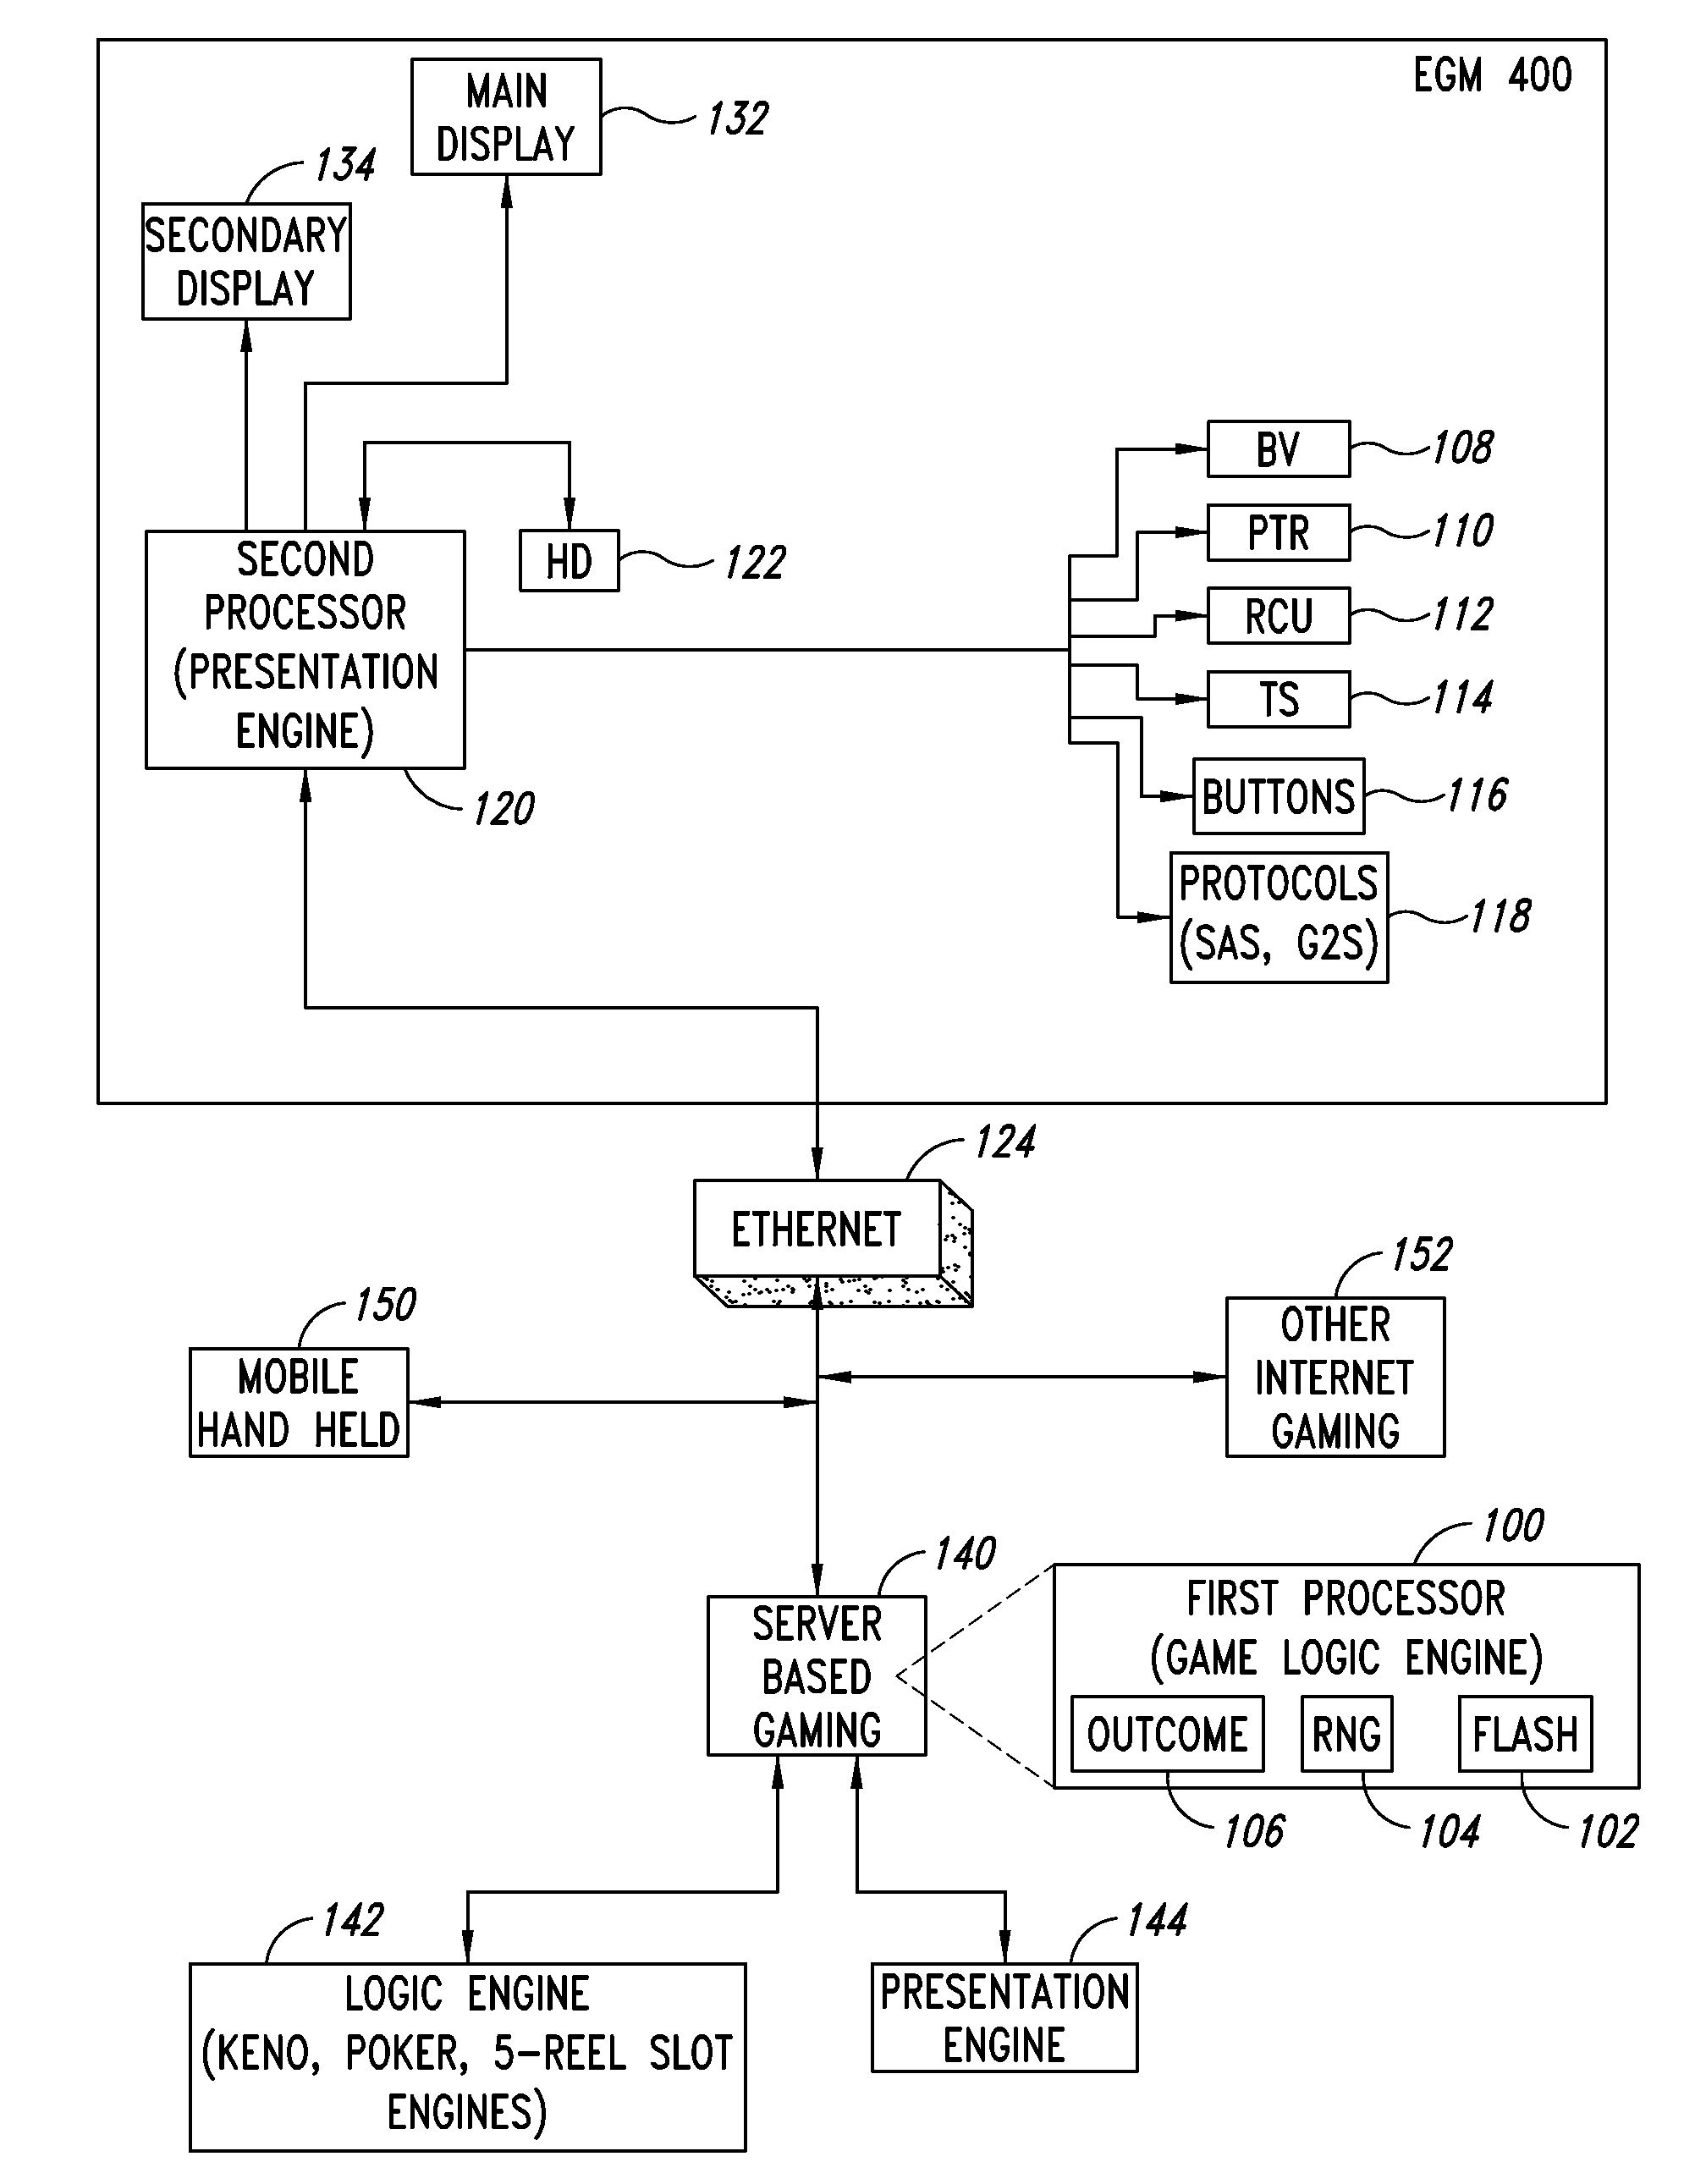 Apparatus, method, and system to provide a multiple processor architecture for server-based gaming